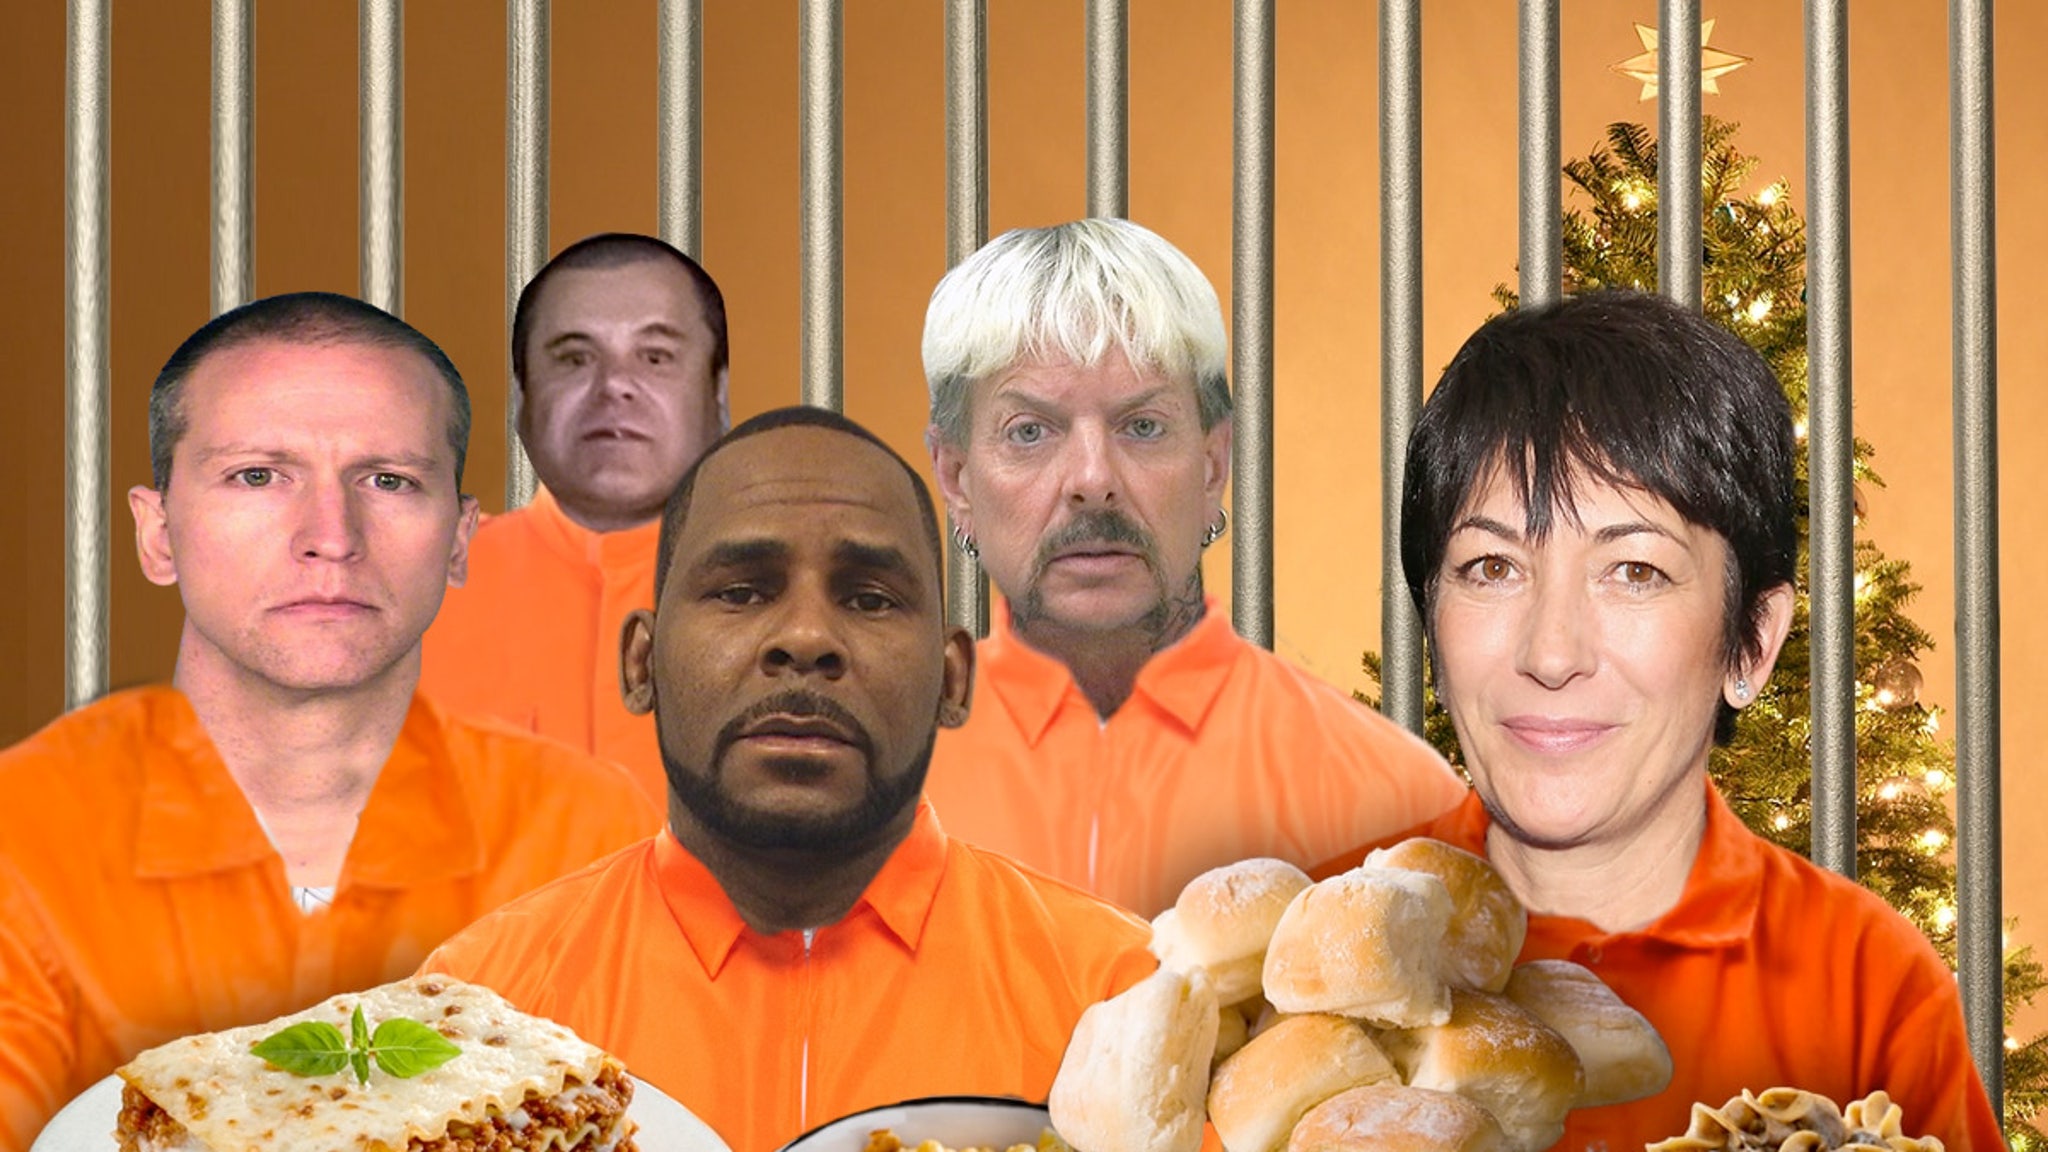 | Celebrity Christmas Meal Menus Behind Bars | The Paradise